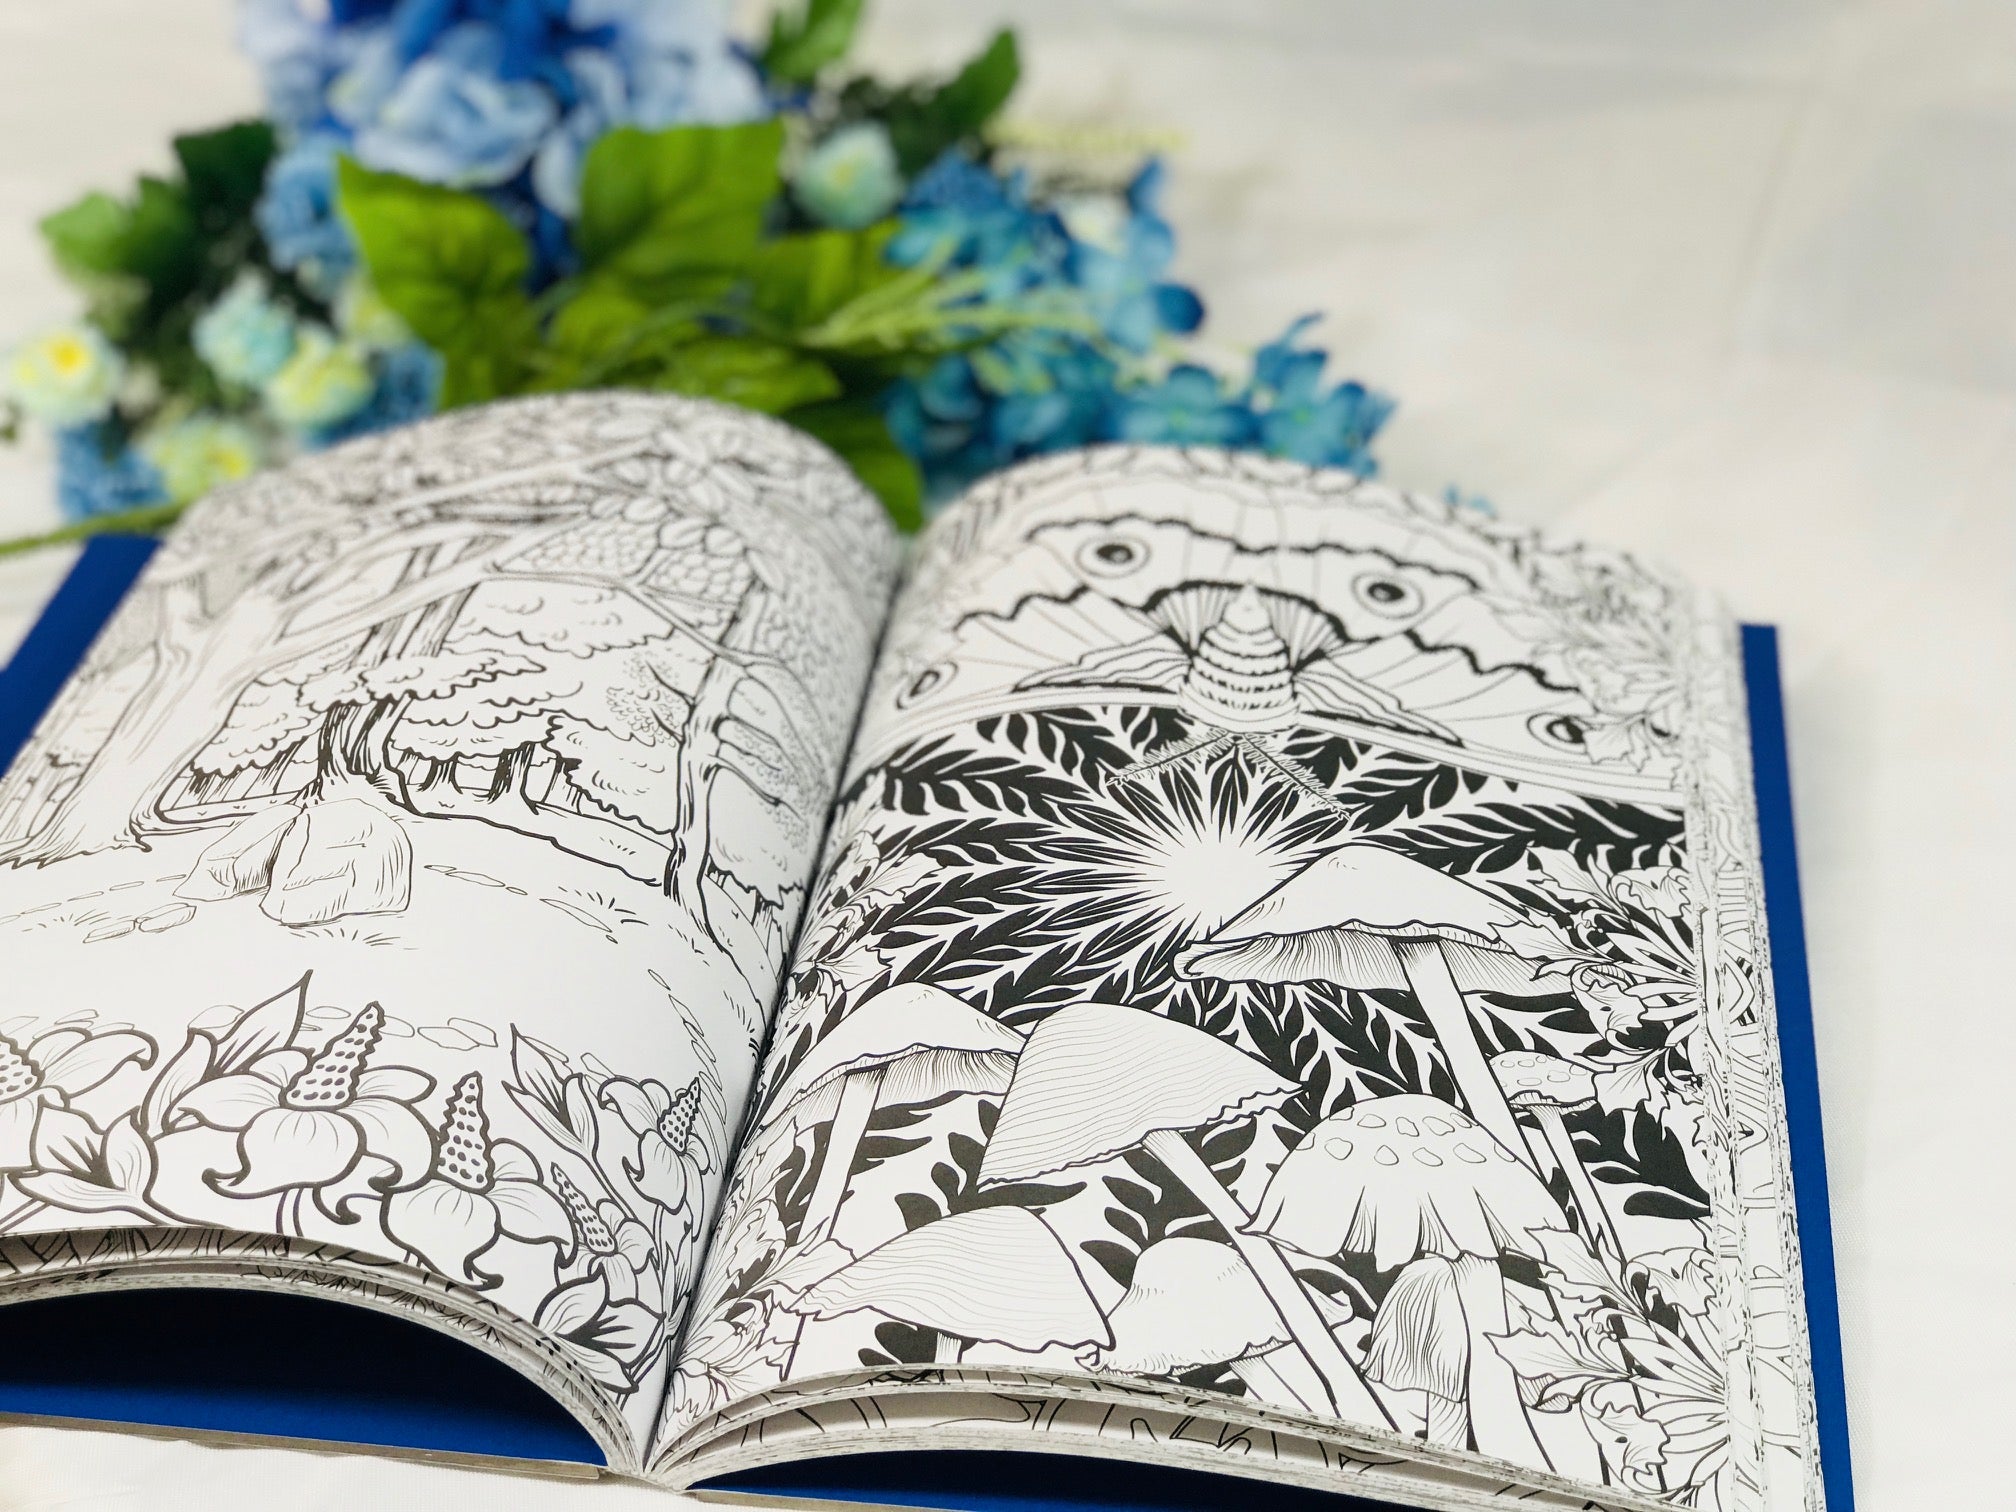 Download The Enchanted Forest Art Therapy Adult Coloring Book - HavenTree